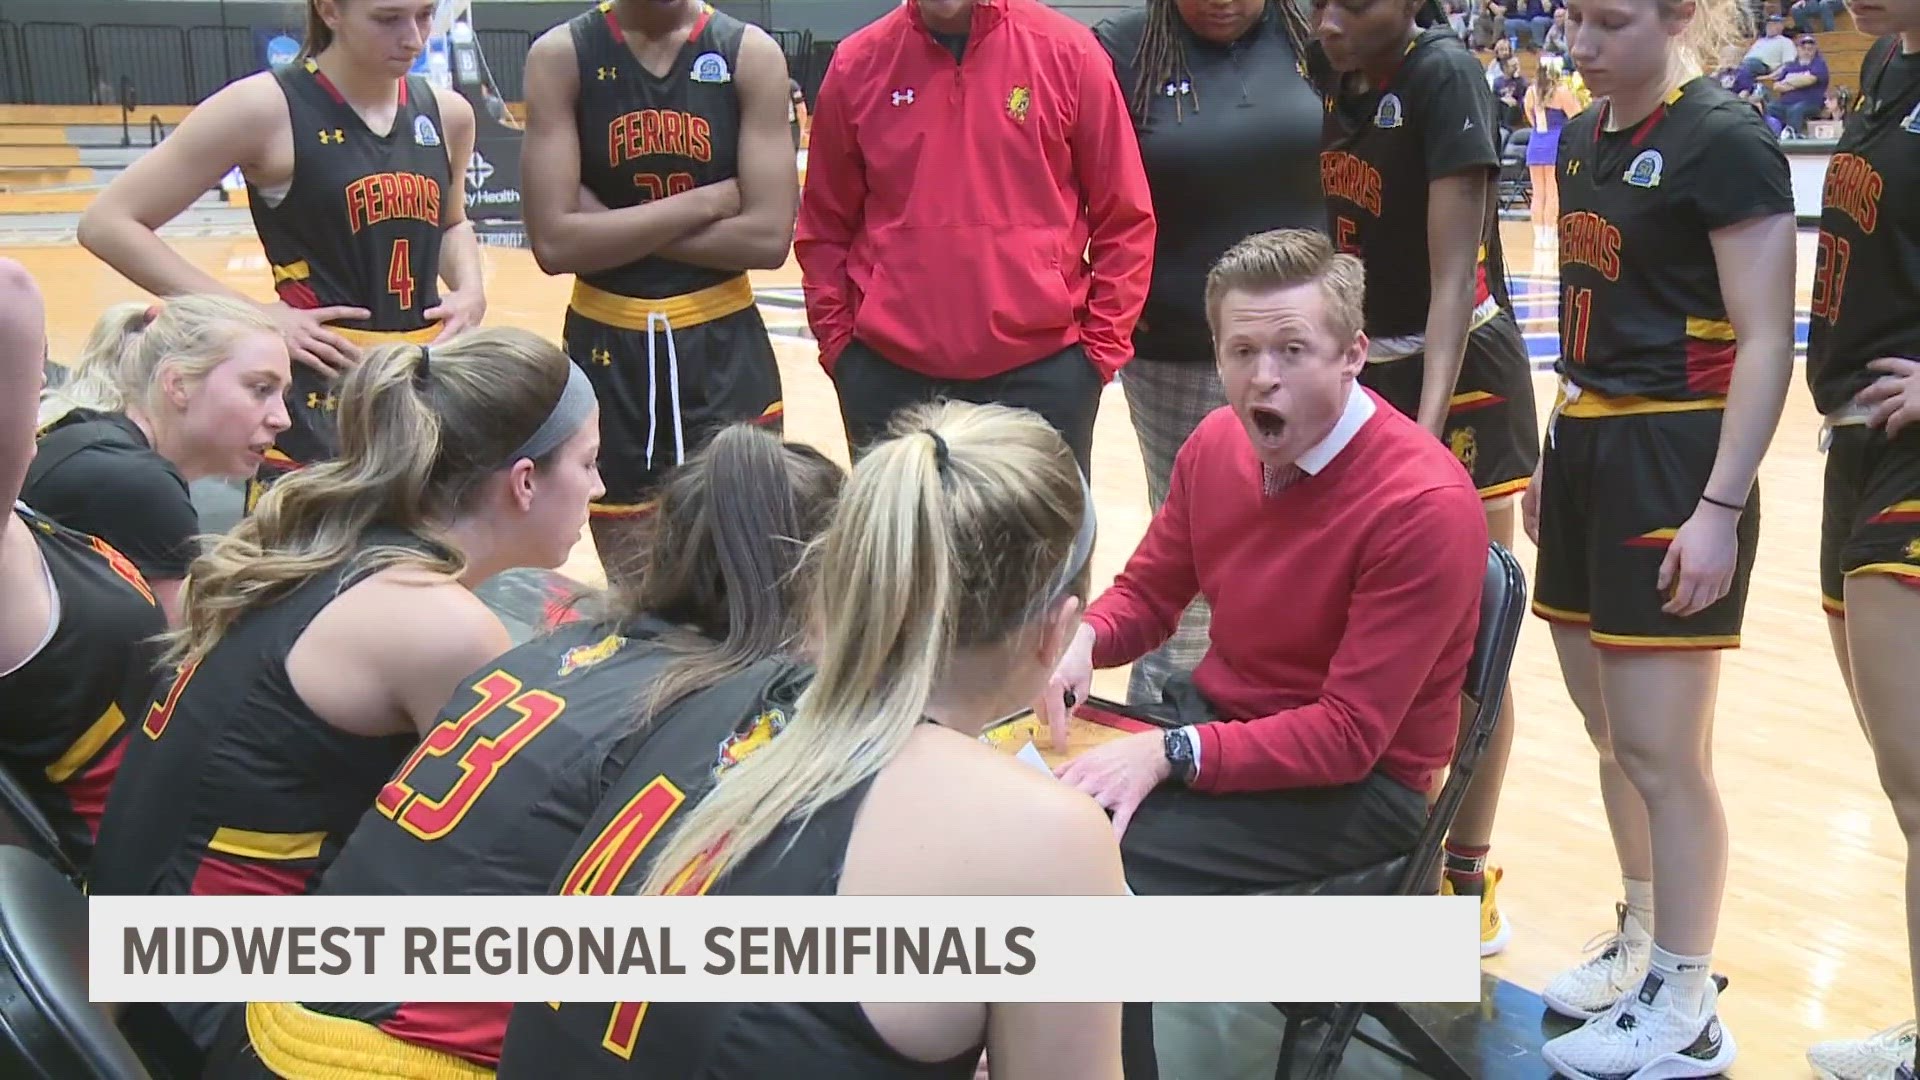 The Bulldogs will face Grand Valley on Monday night for the regional championship.